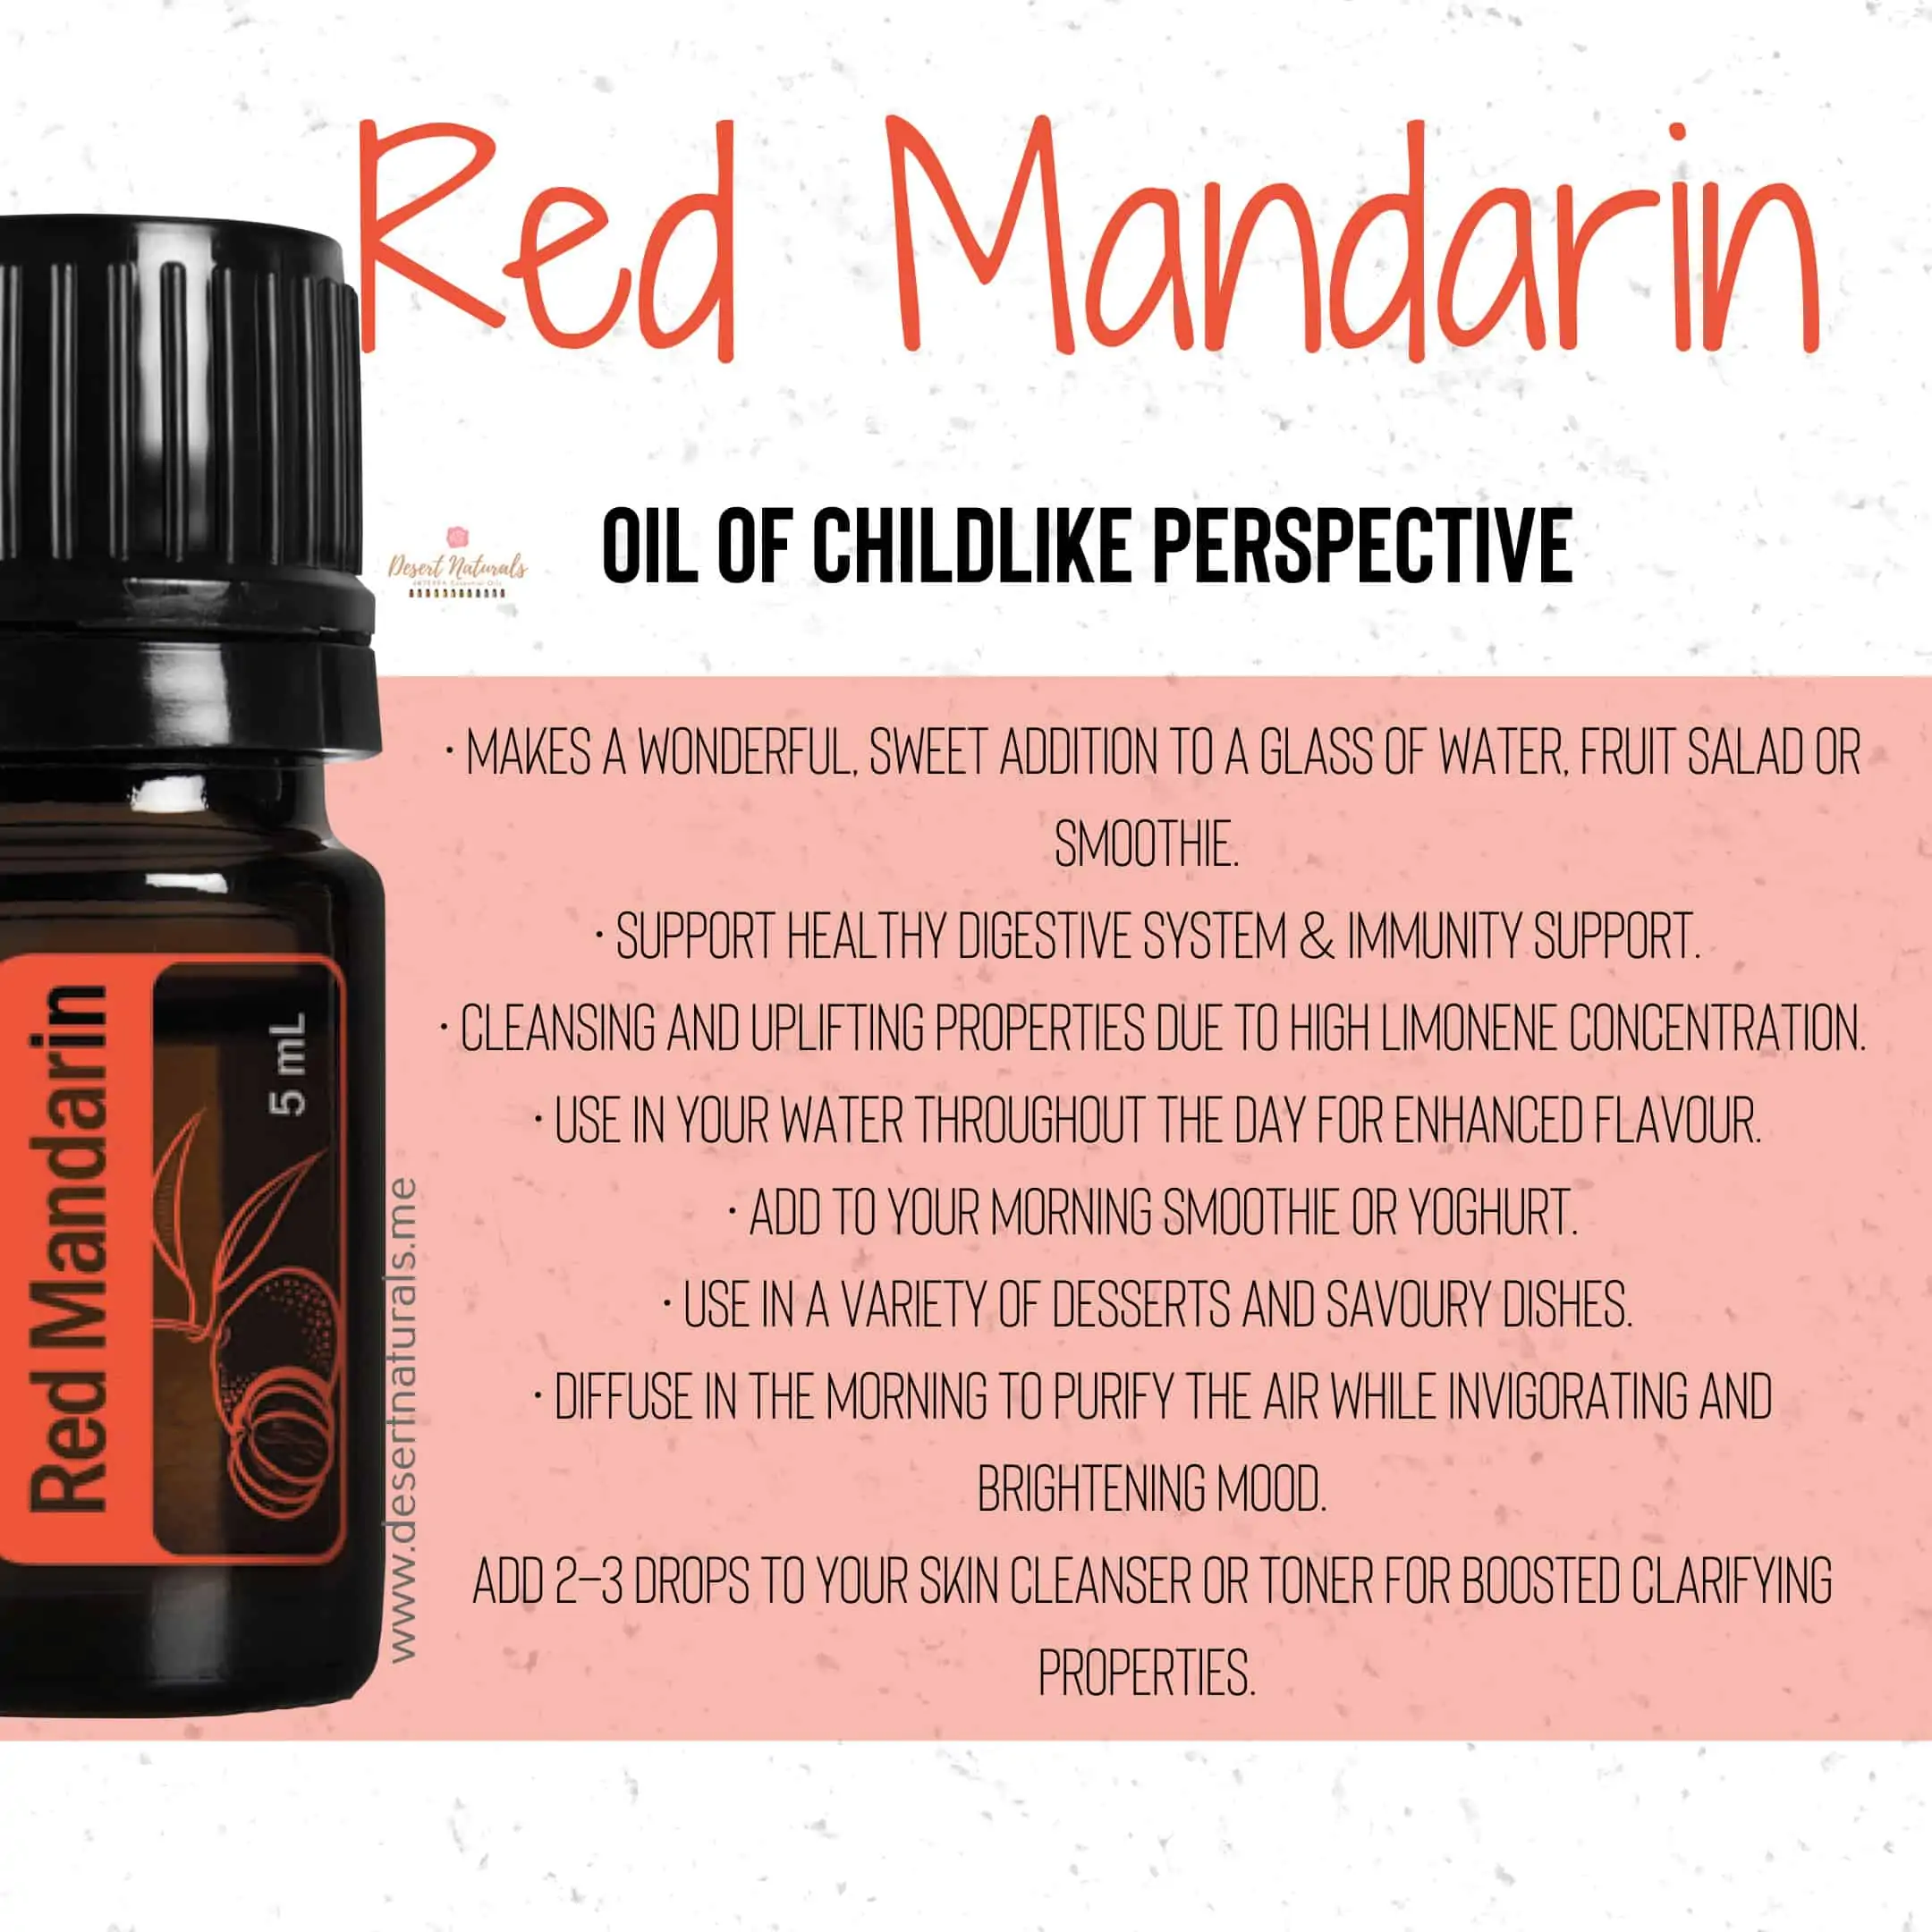 a list of some of the benefits of doterra red mandain essential oil with an image of the 5ml bottle of essential oil